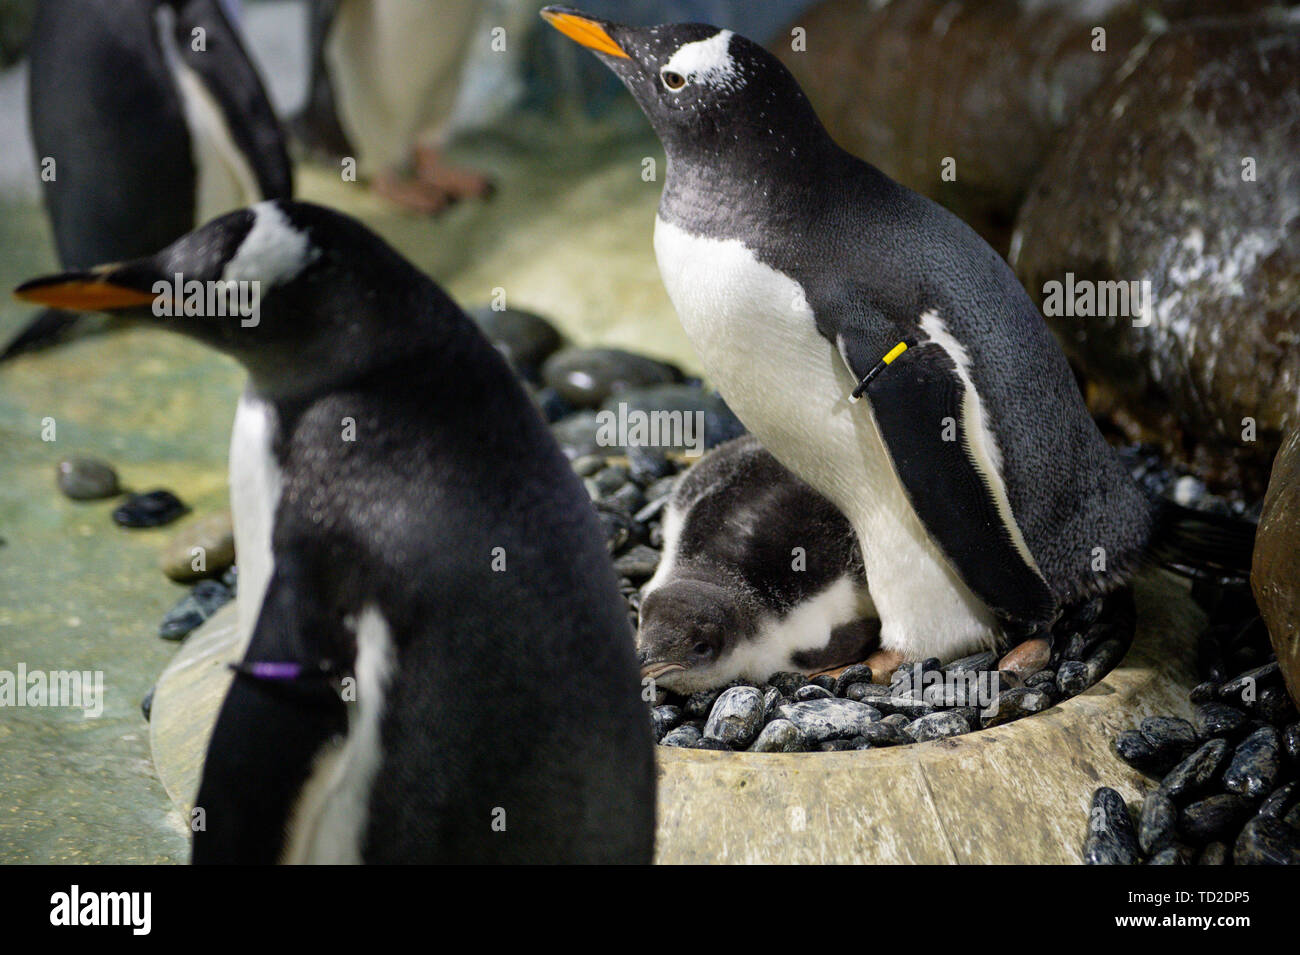 A rare baby Gentoo penguin which was born at the National Sea Life Centre in Birmingham. The chick, whose parents traveled thousands of miles by airplane to conceive as part of Sea Life's breeding programme, has been named 'Flash' after it hatched so quickly. Stock Photo